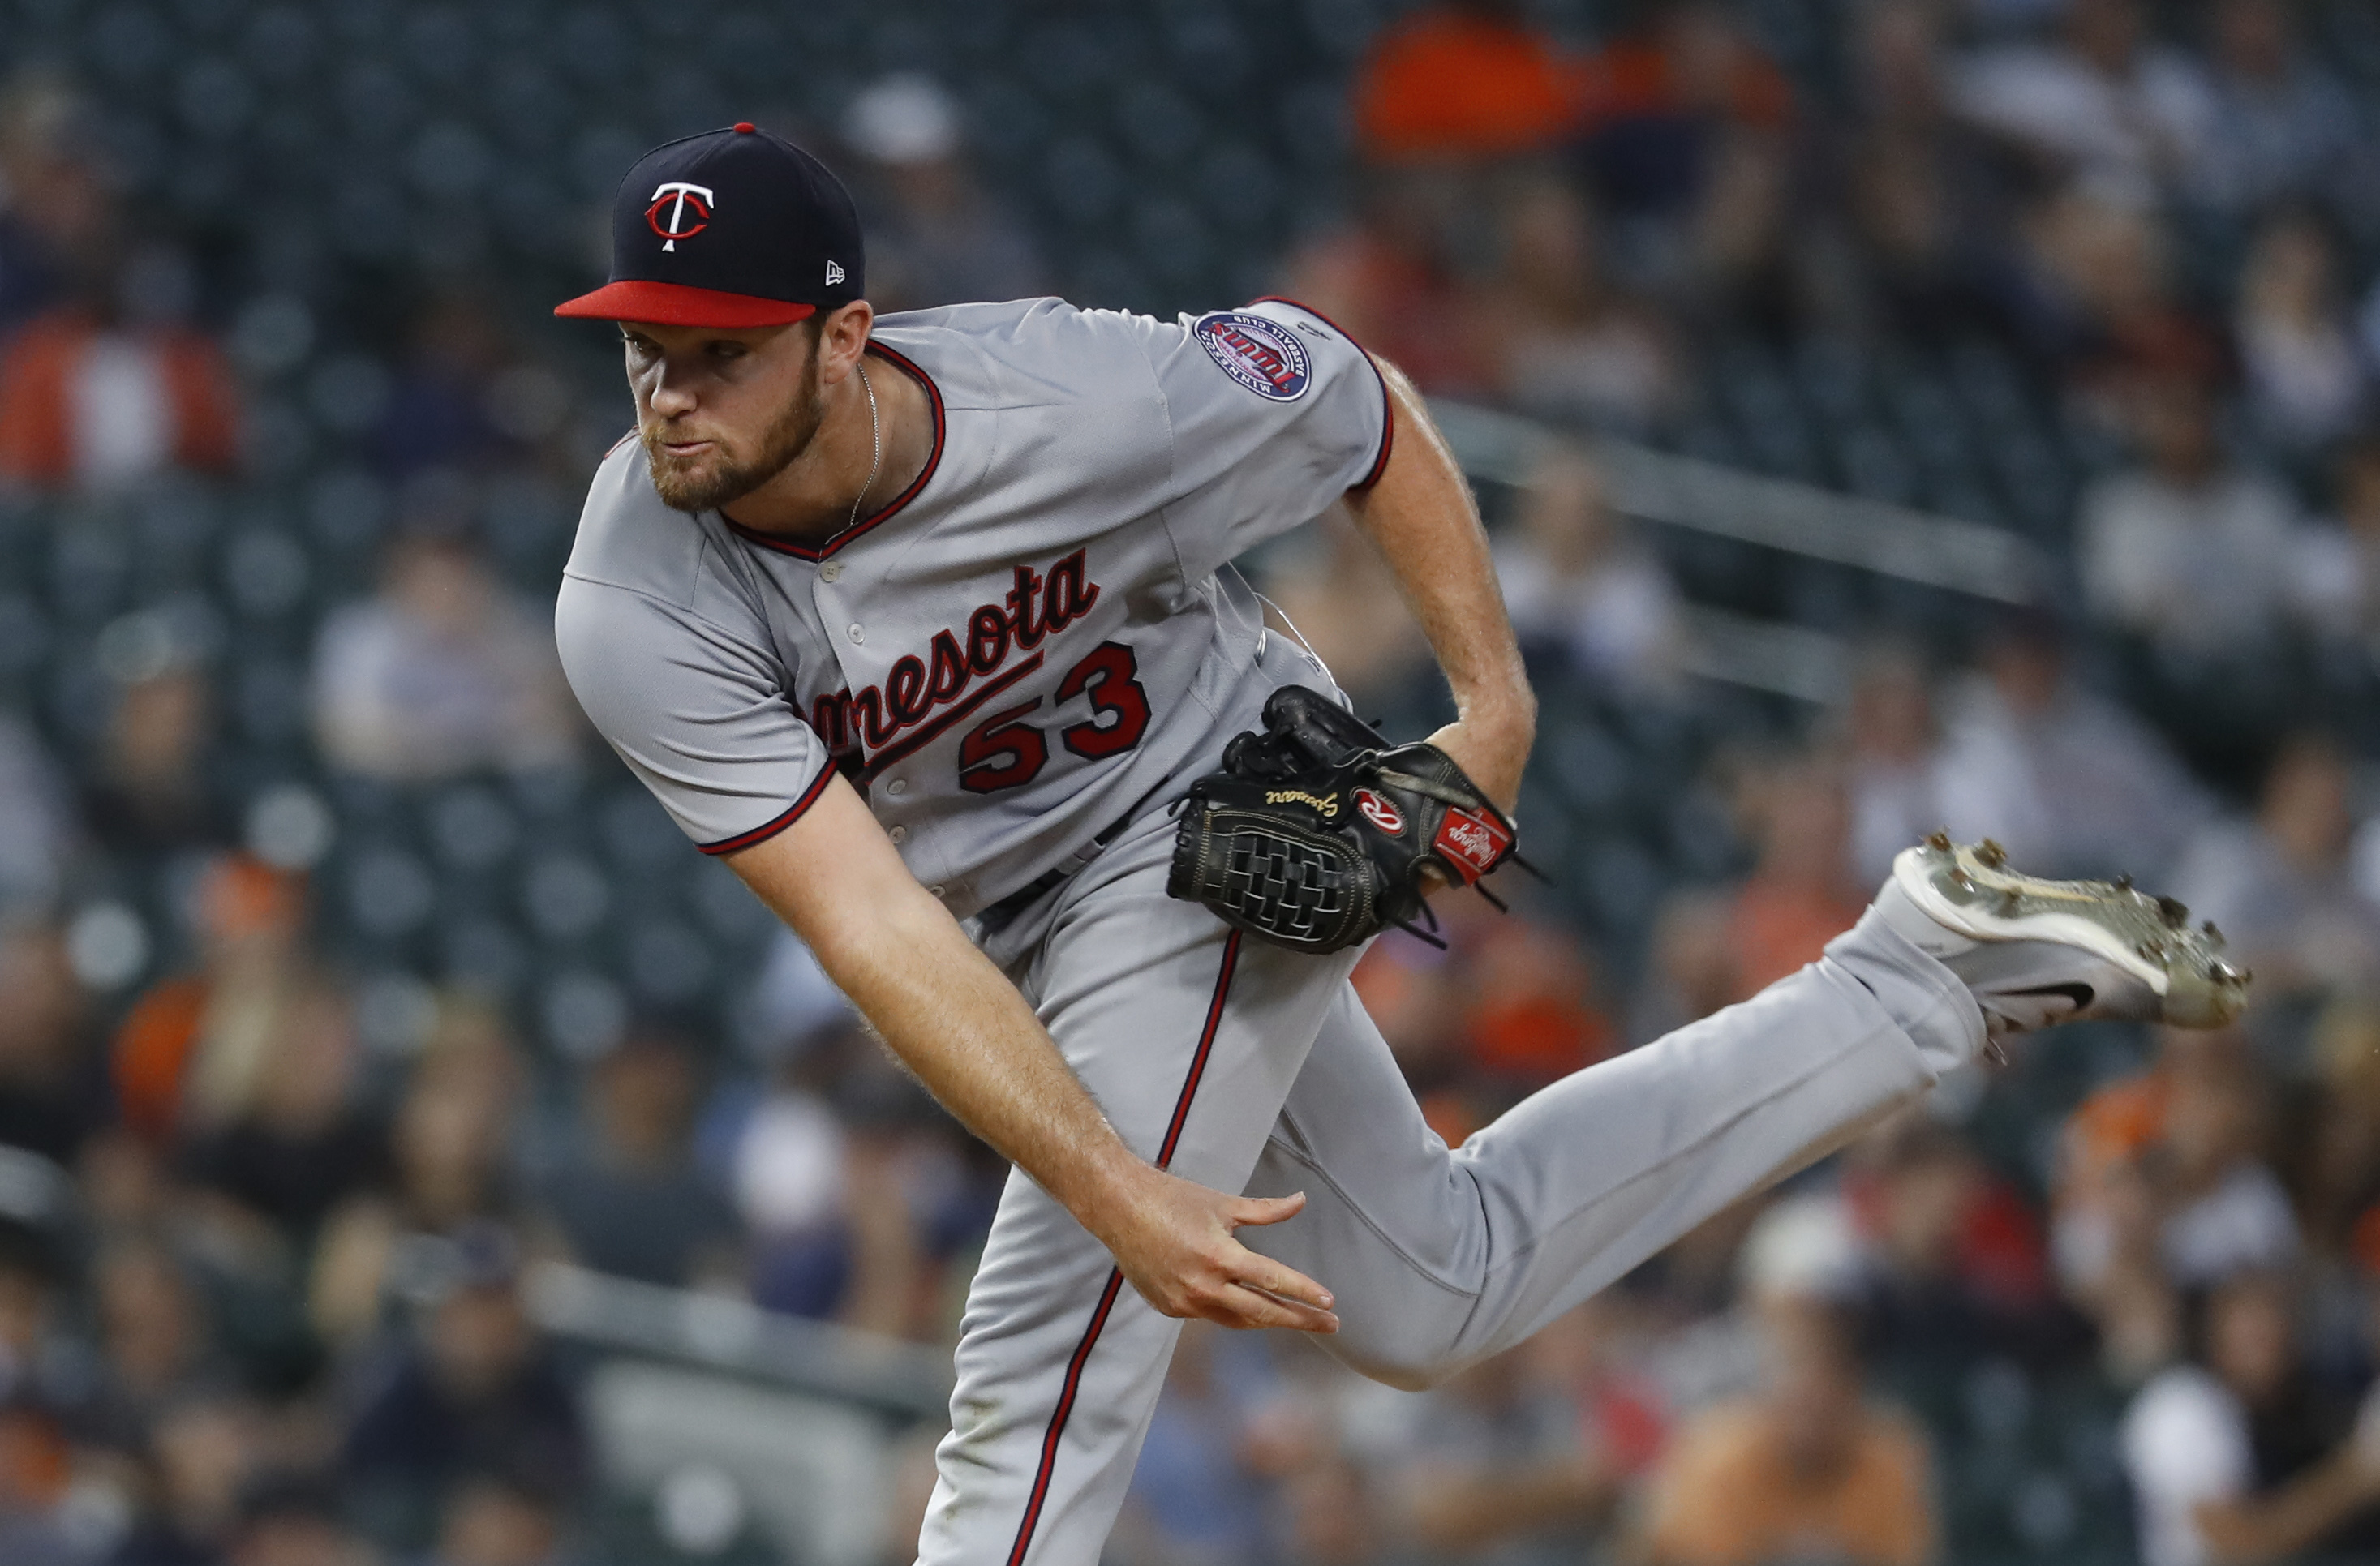 Twins beat Tigers 6-1 behind 6 sharp innings from Stewart